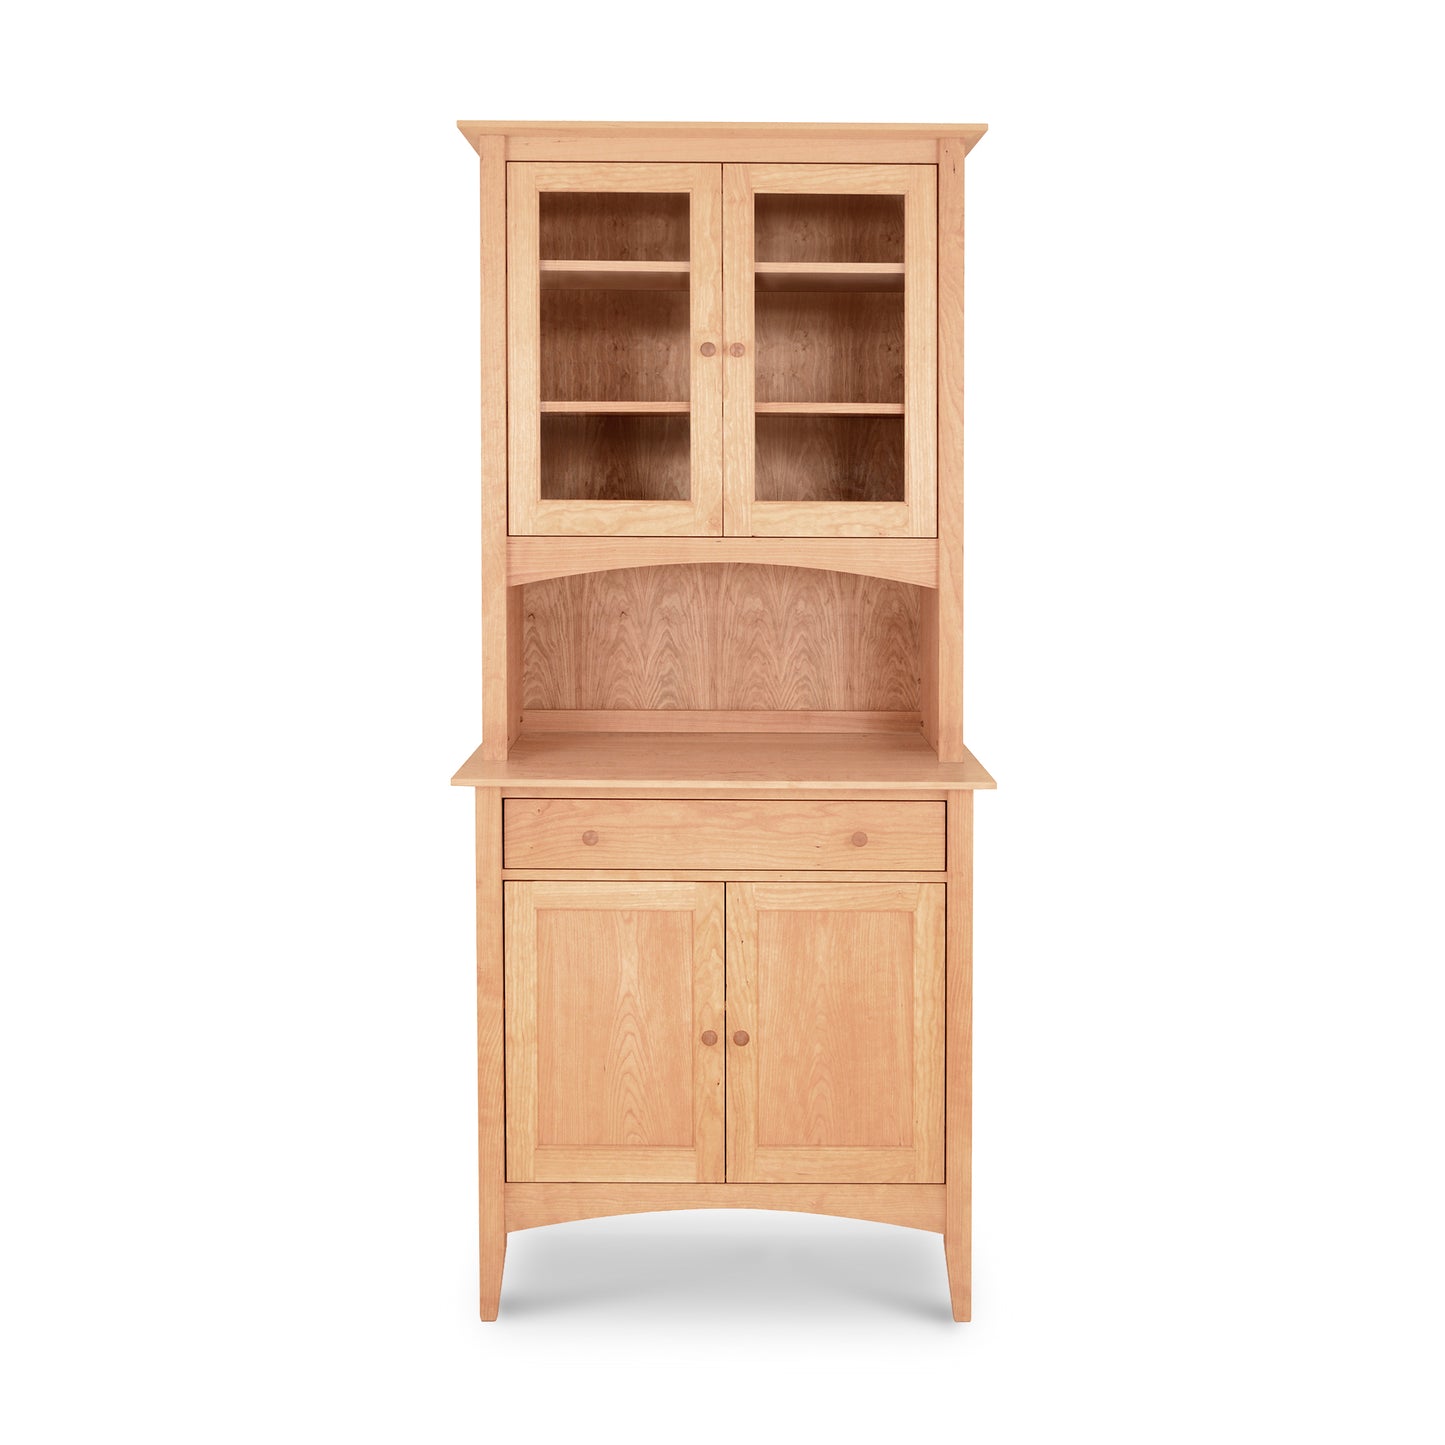 An American Shaker Small 38" China Cabinet with a glass door, made by Maple Corner Woodworks.